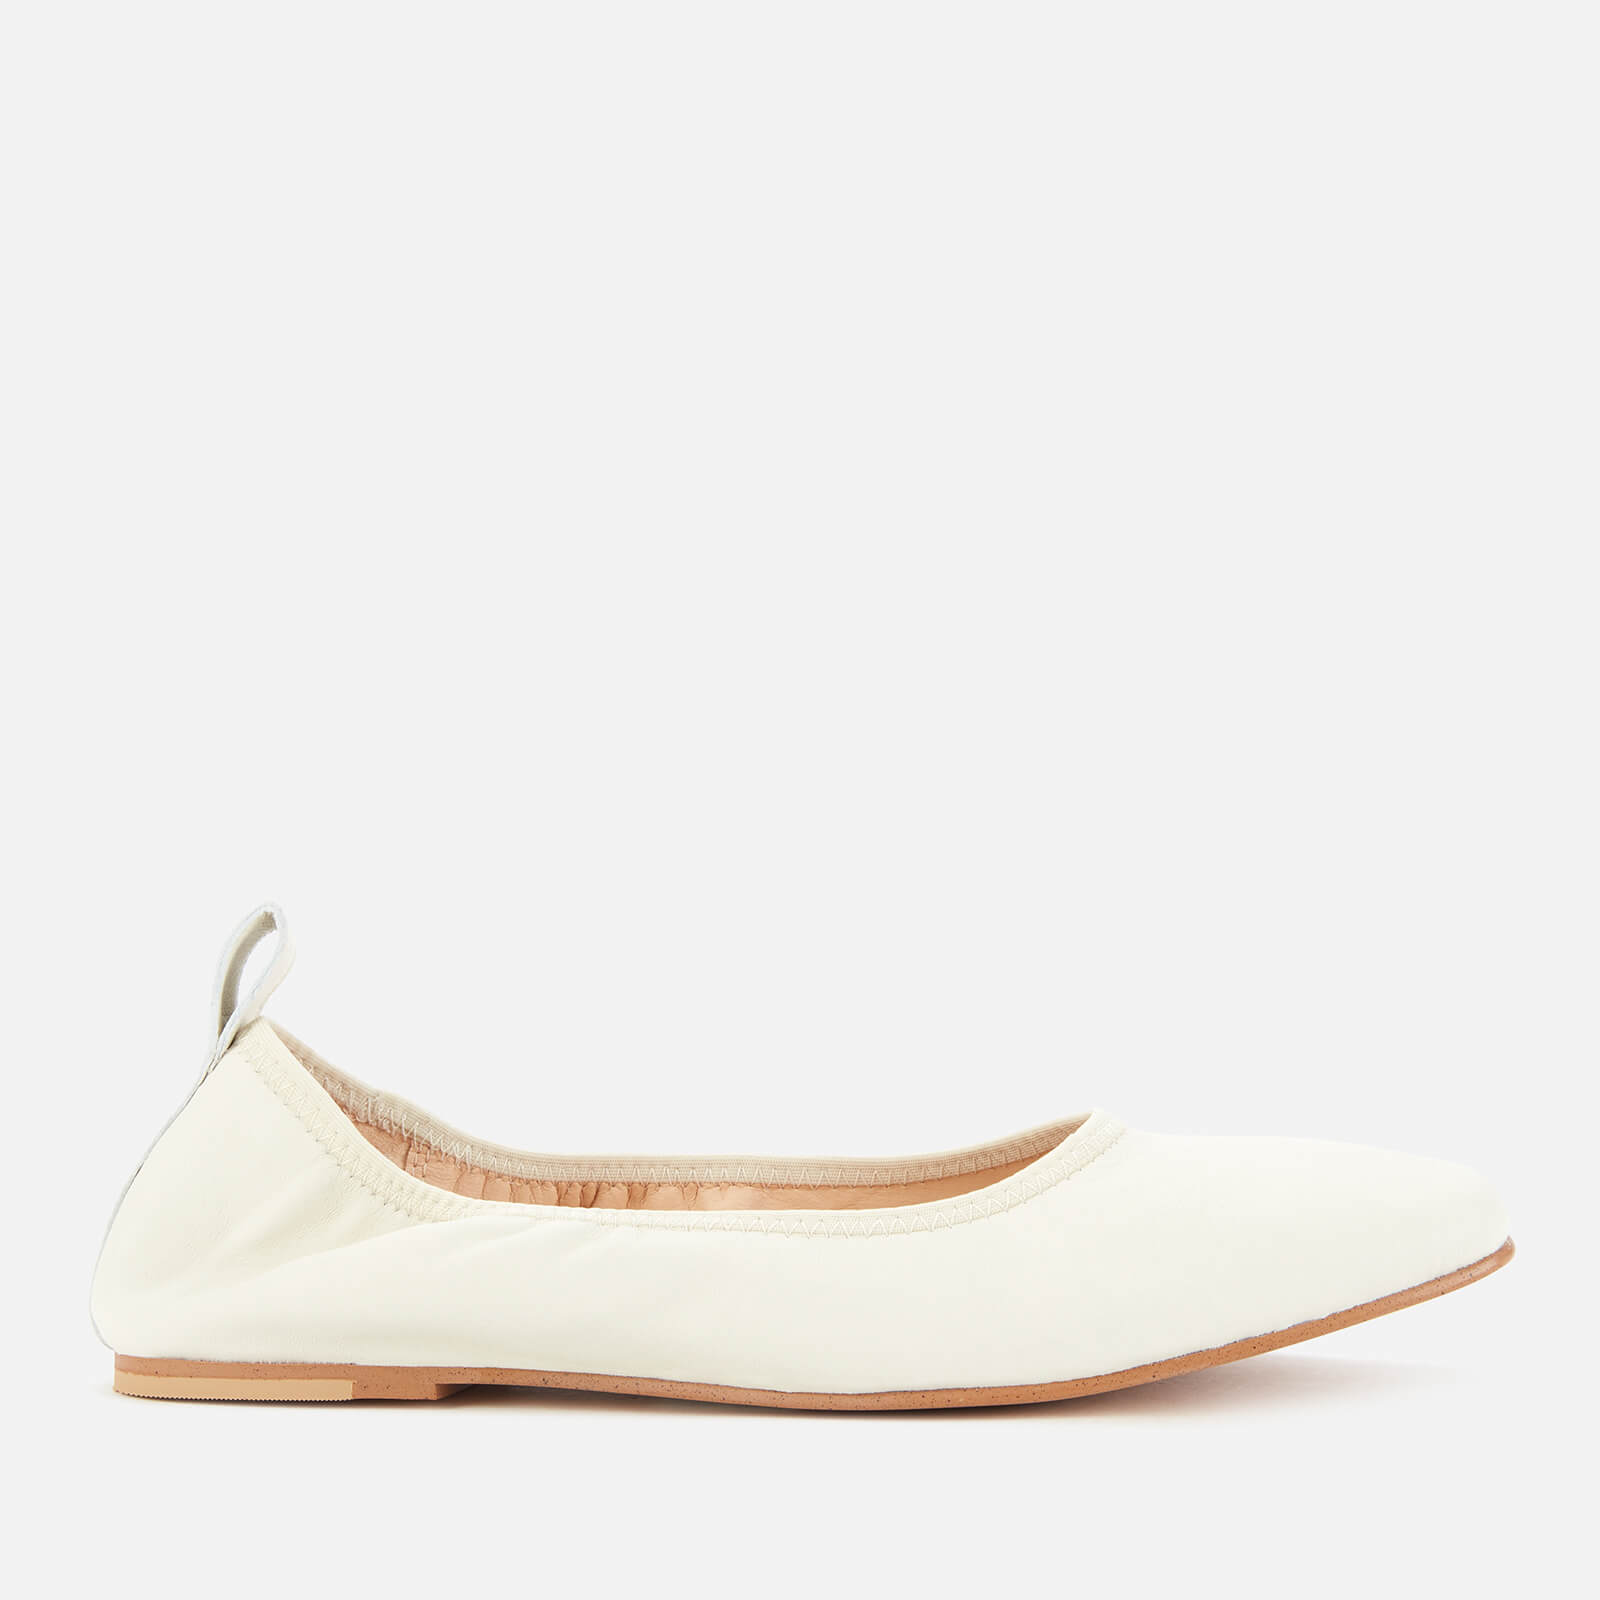 Clarks Women's Pure Leather Ballet Flats - White - UK 3